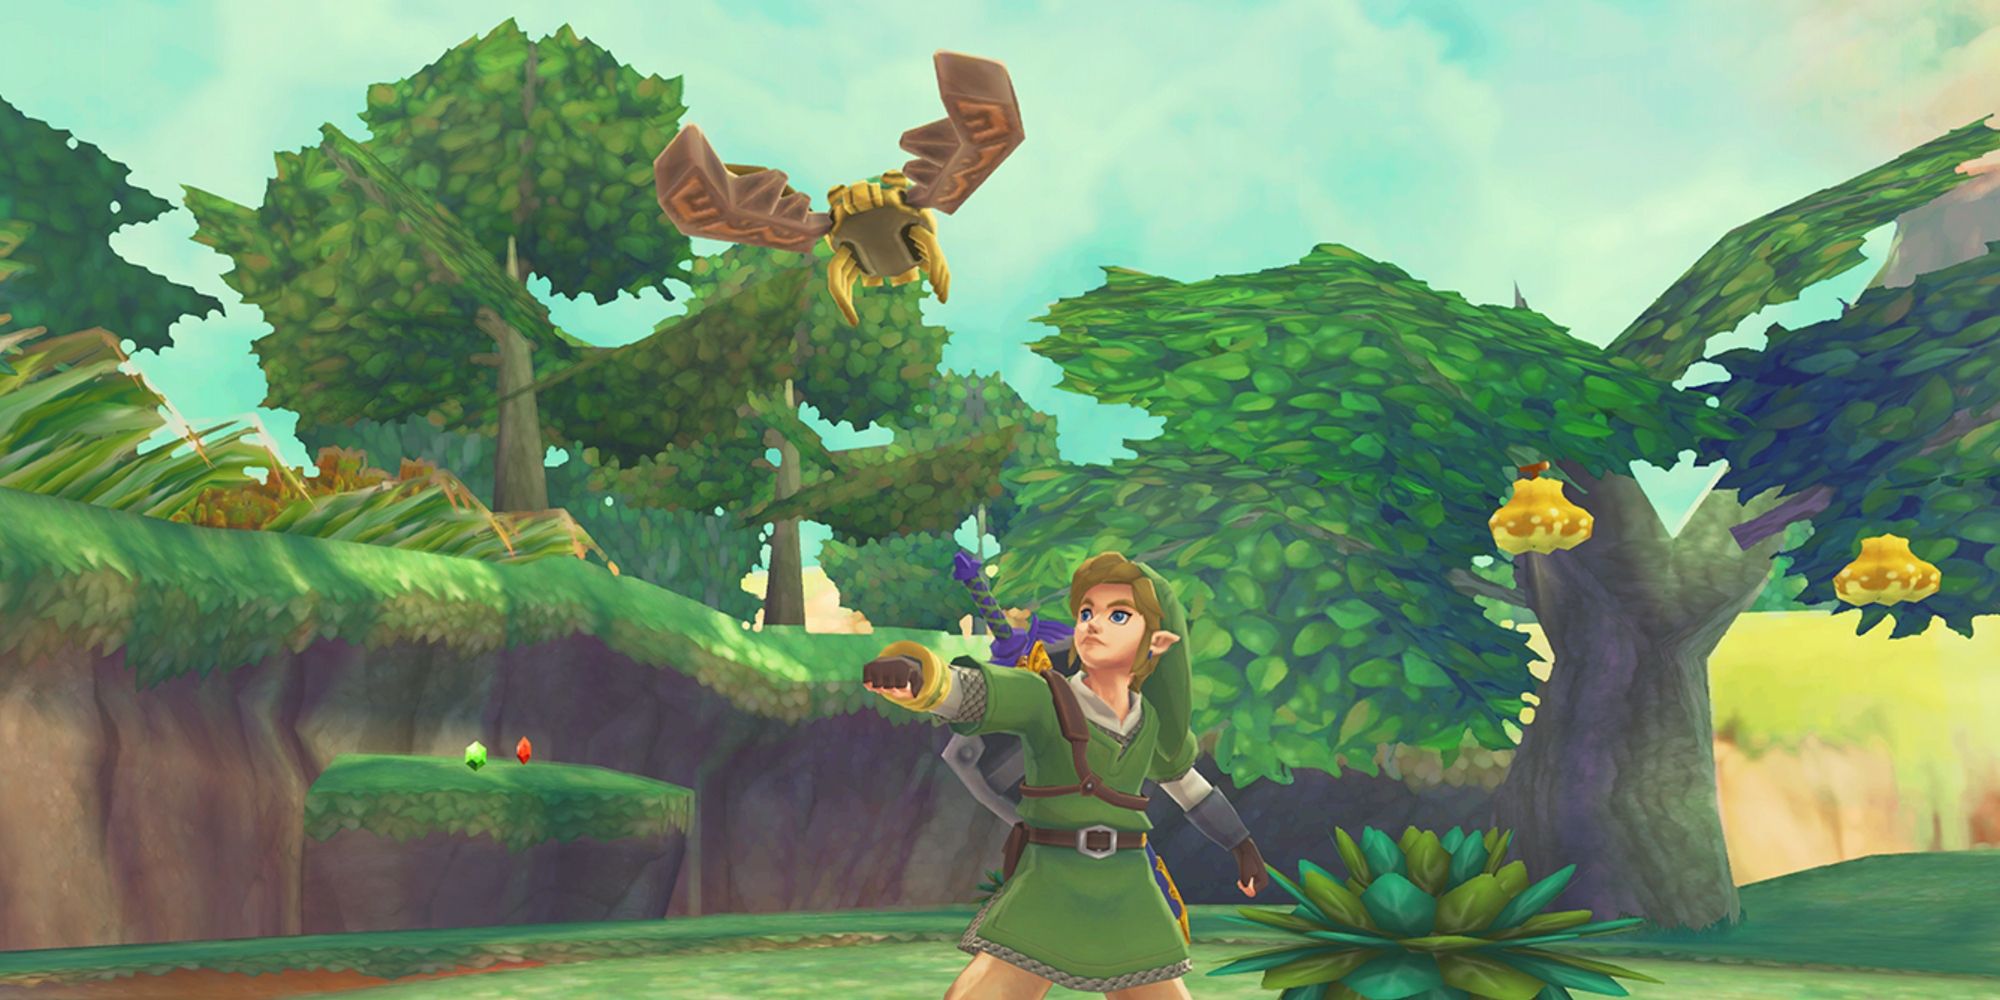 Skyward Sword HD's story is long even when ignoring side content